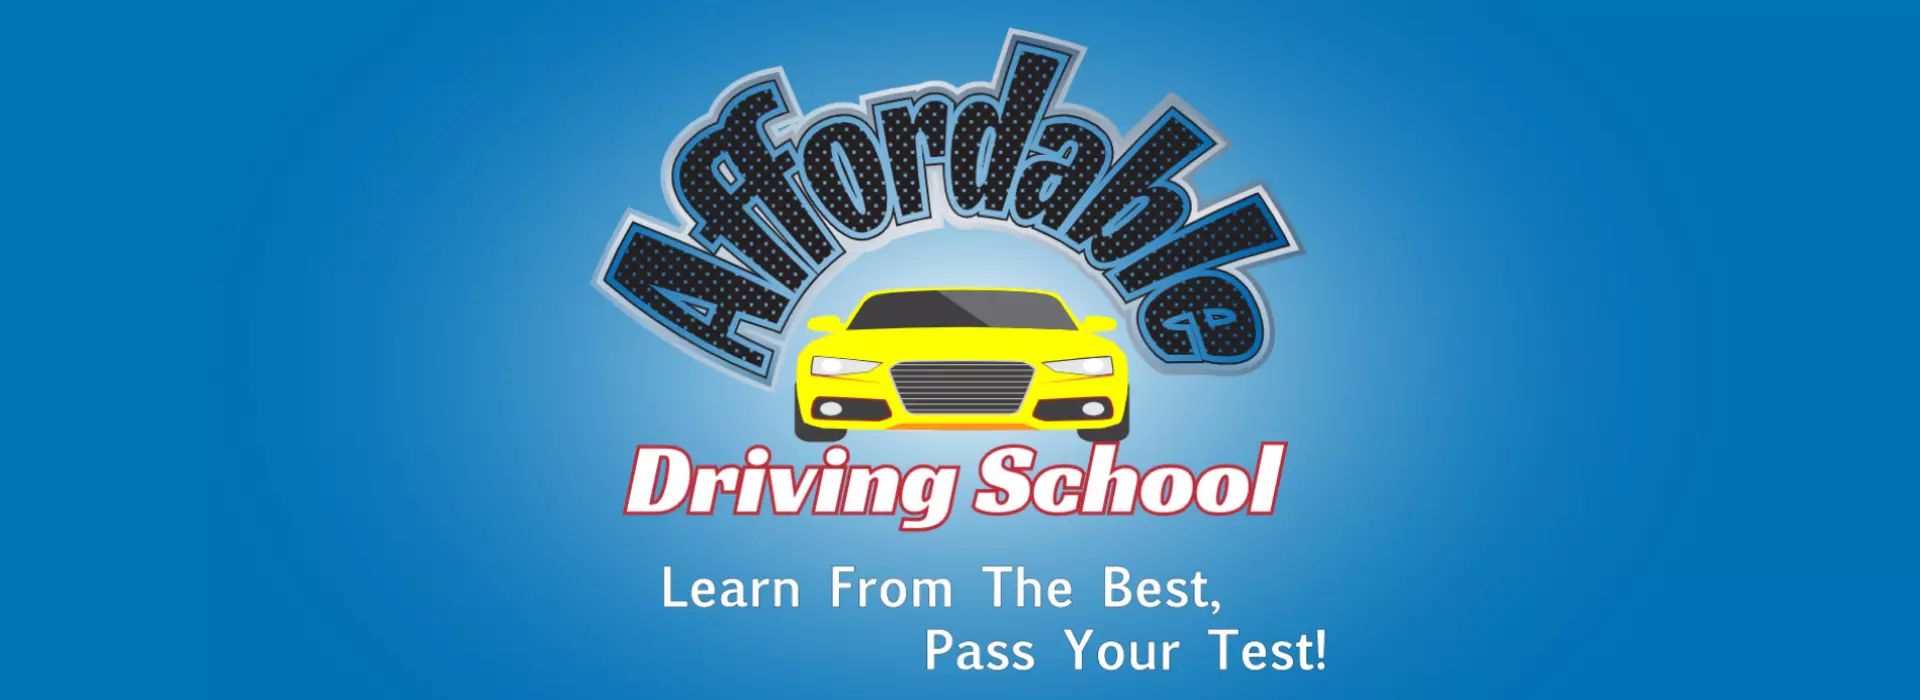 Affordable Driving School